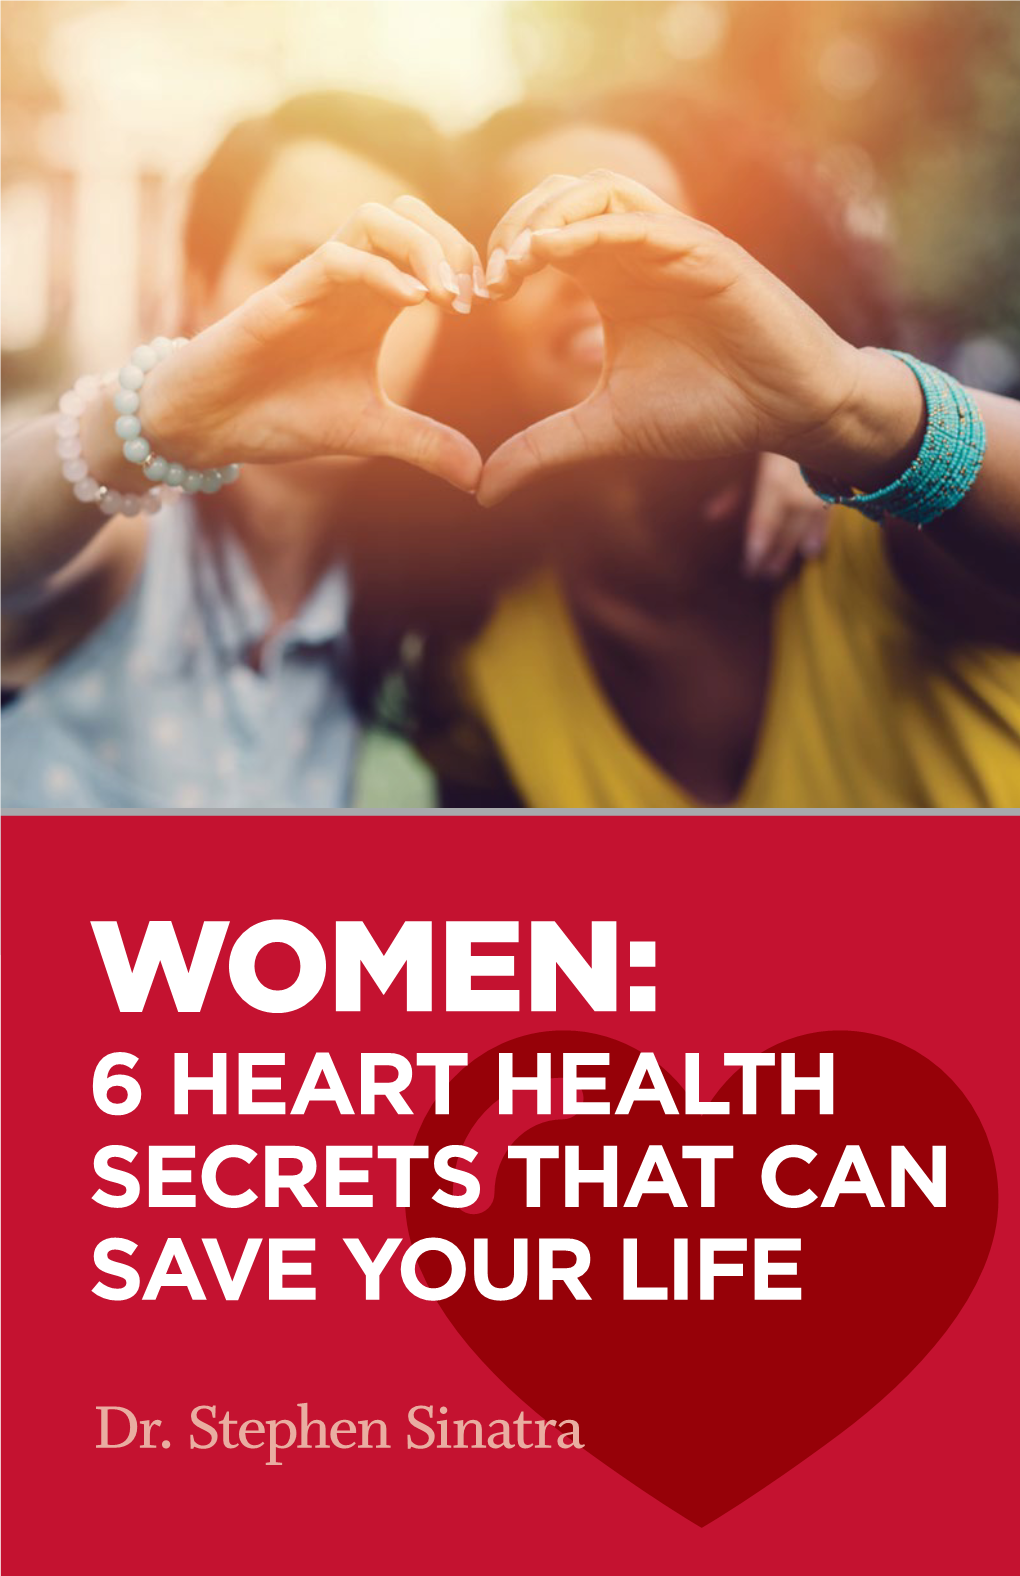 Dr. Stephen Sinatra's 6 Heart Healthy Secrets That Can Save Your Life